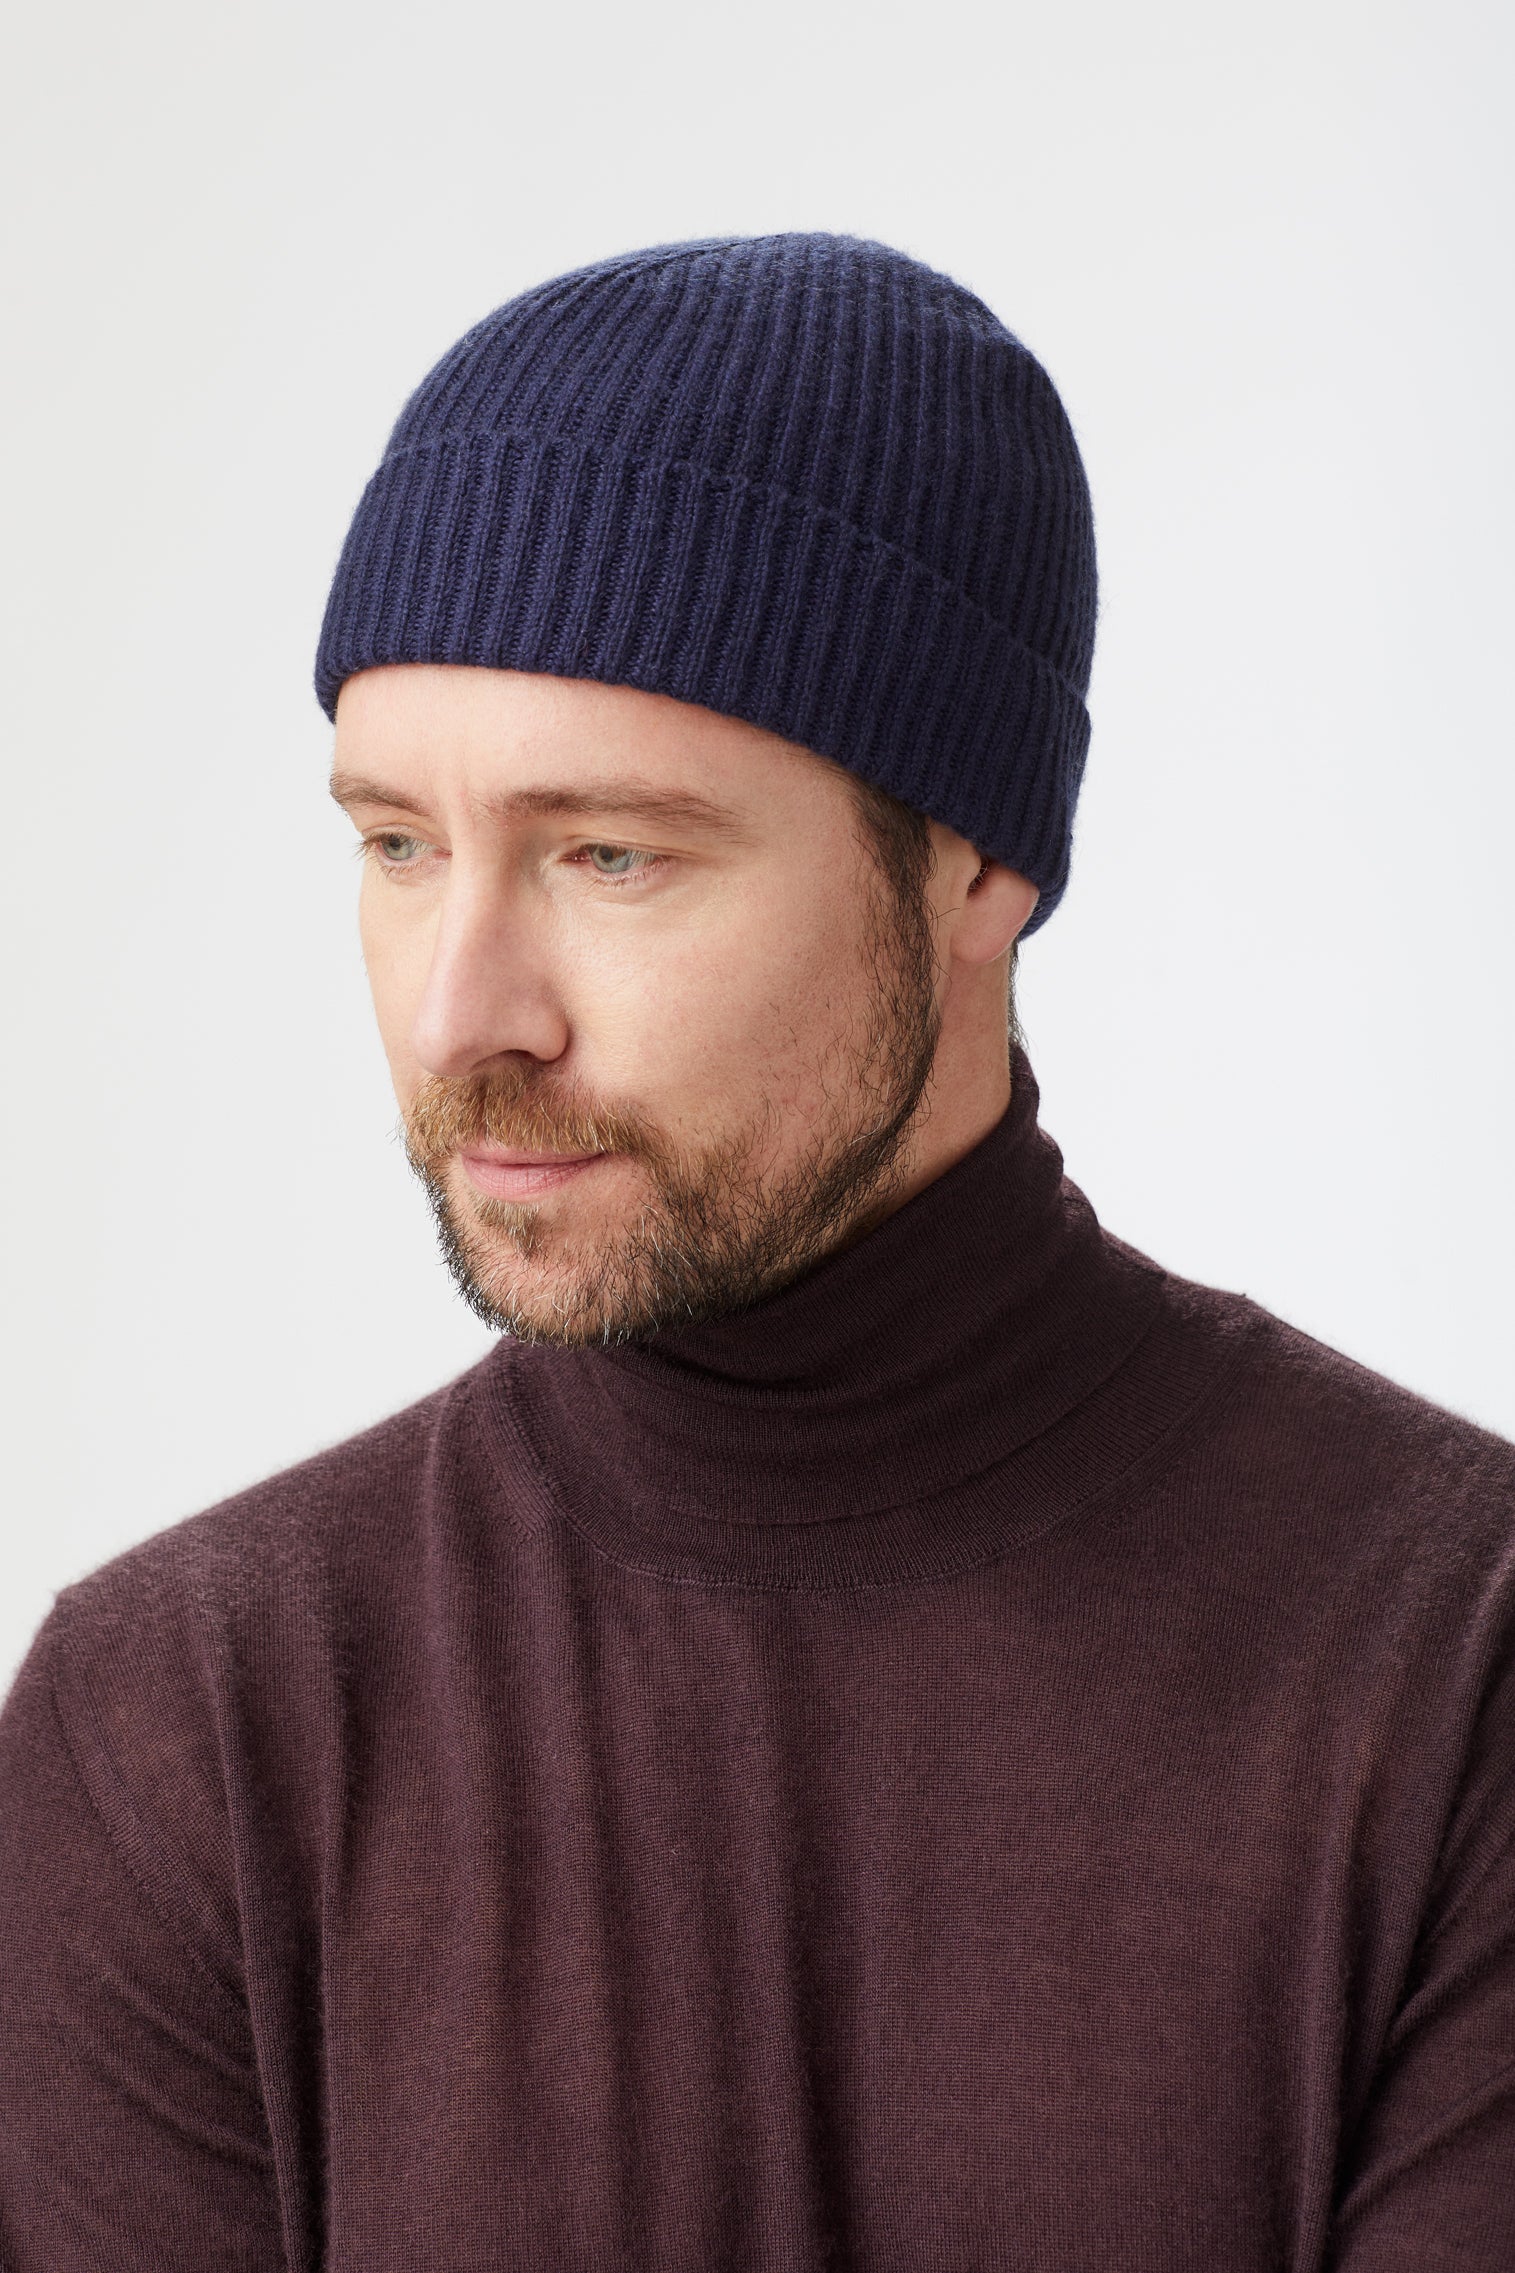 Blue Cashmere Ski Beanie - Hats for Tall People - Lock & Co. Hatters London UK